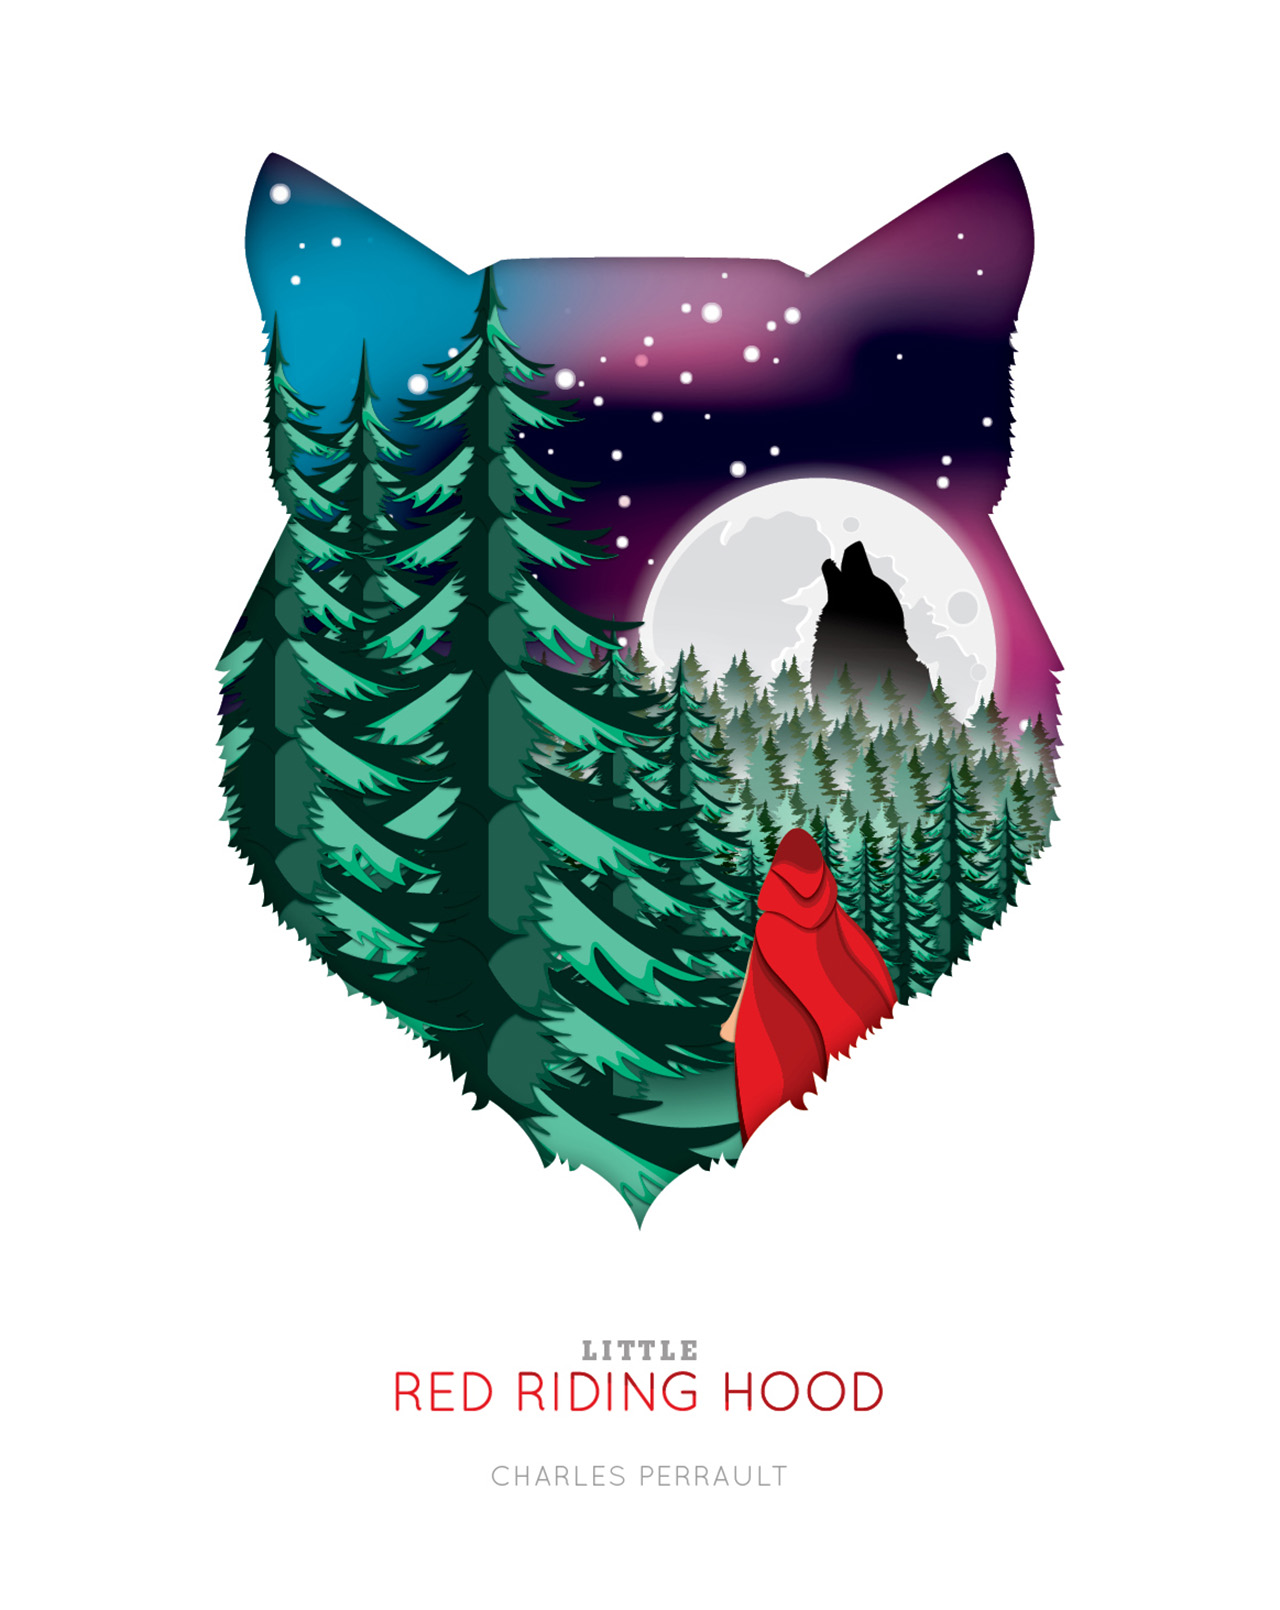 Erin Kunz | "Little Red Riding Hood" by Charles Perrault